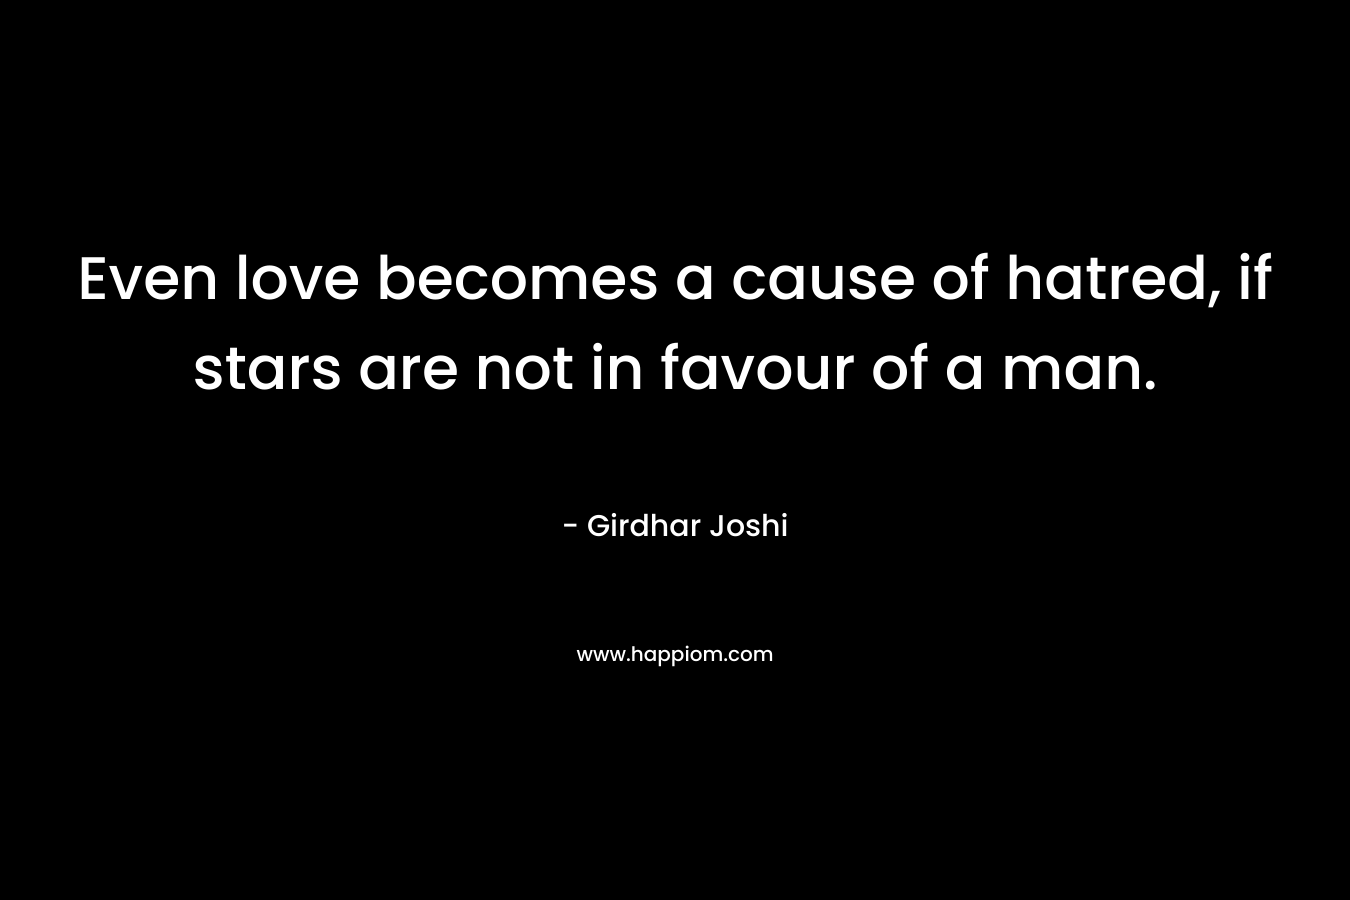 Even love becomes a cause of hatred, if stars are not in favour of a man.